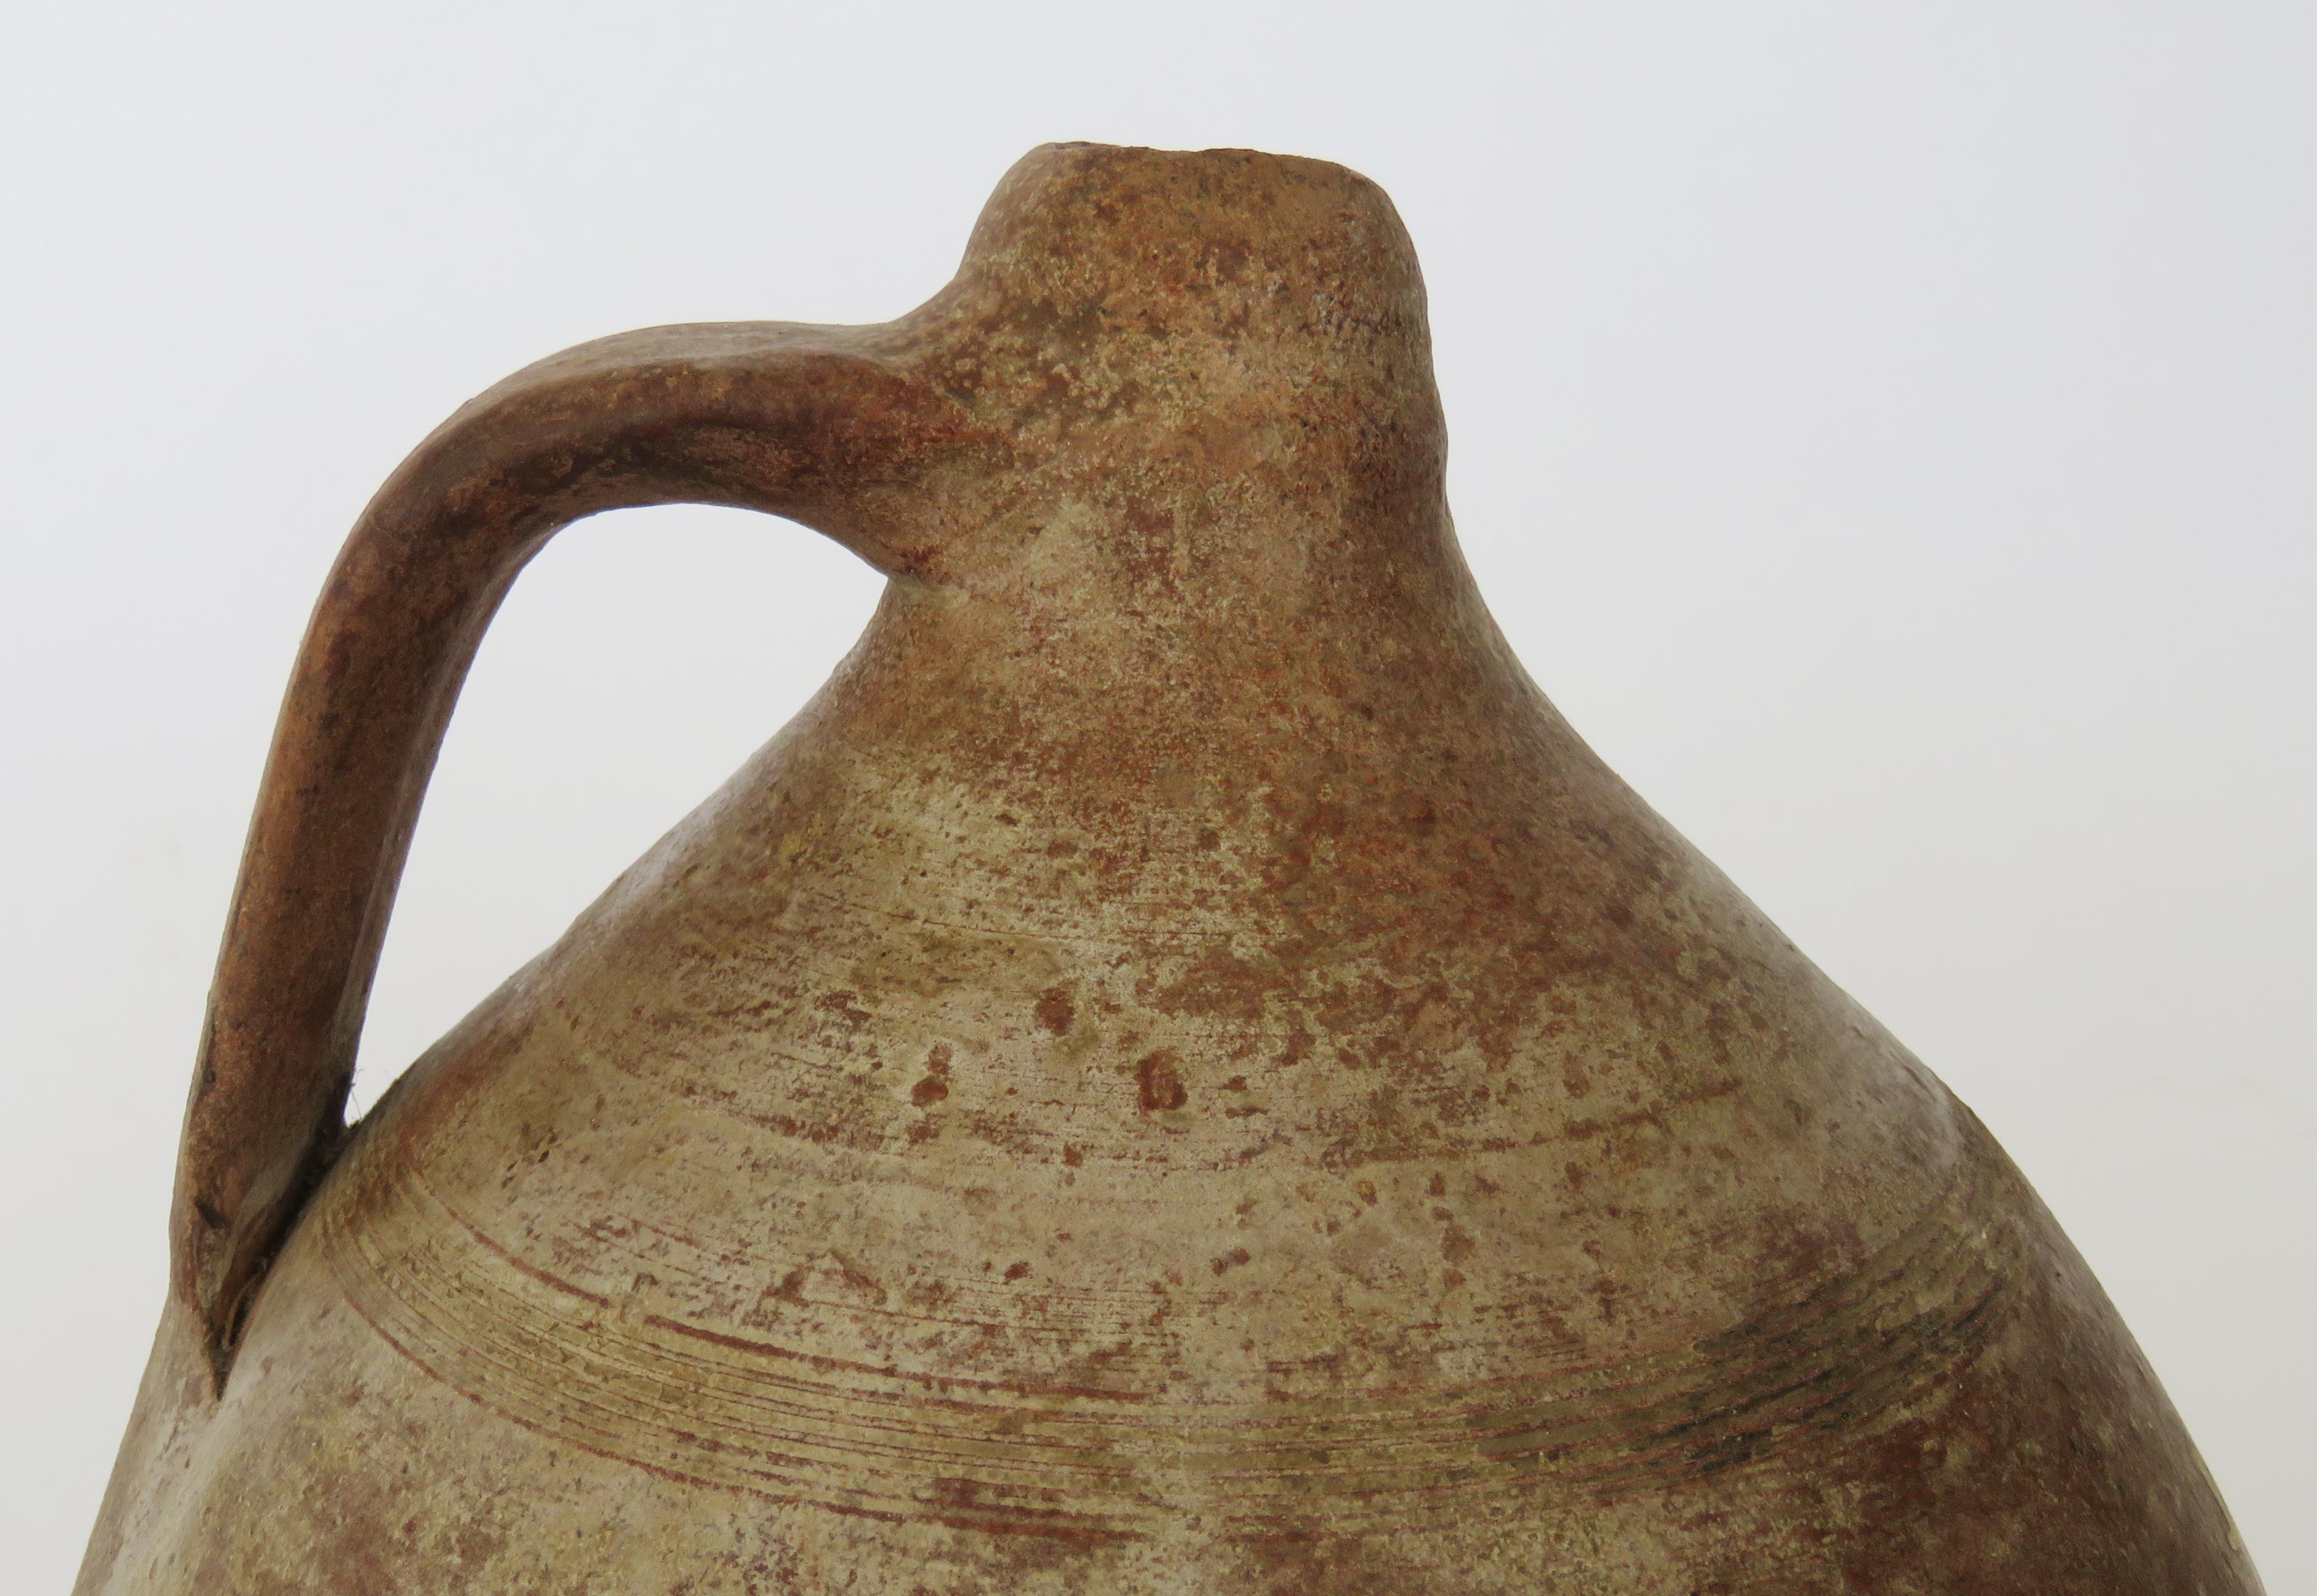 Rustic hand coiled jug with bottle neck and handle.